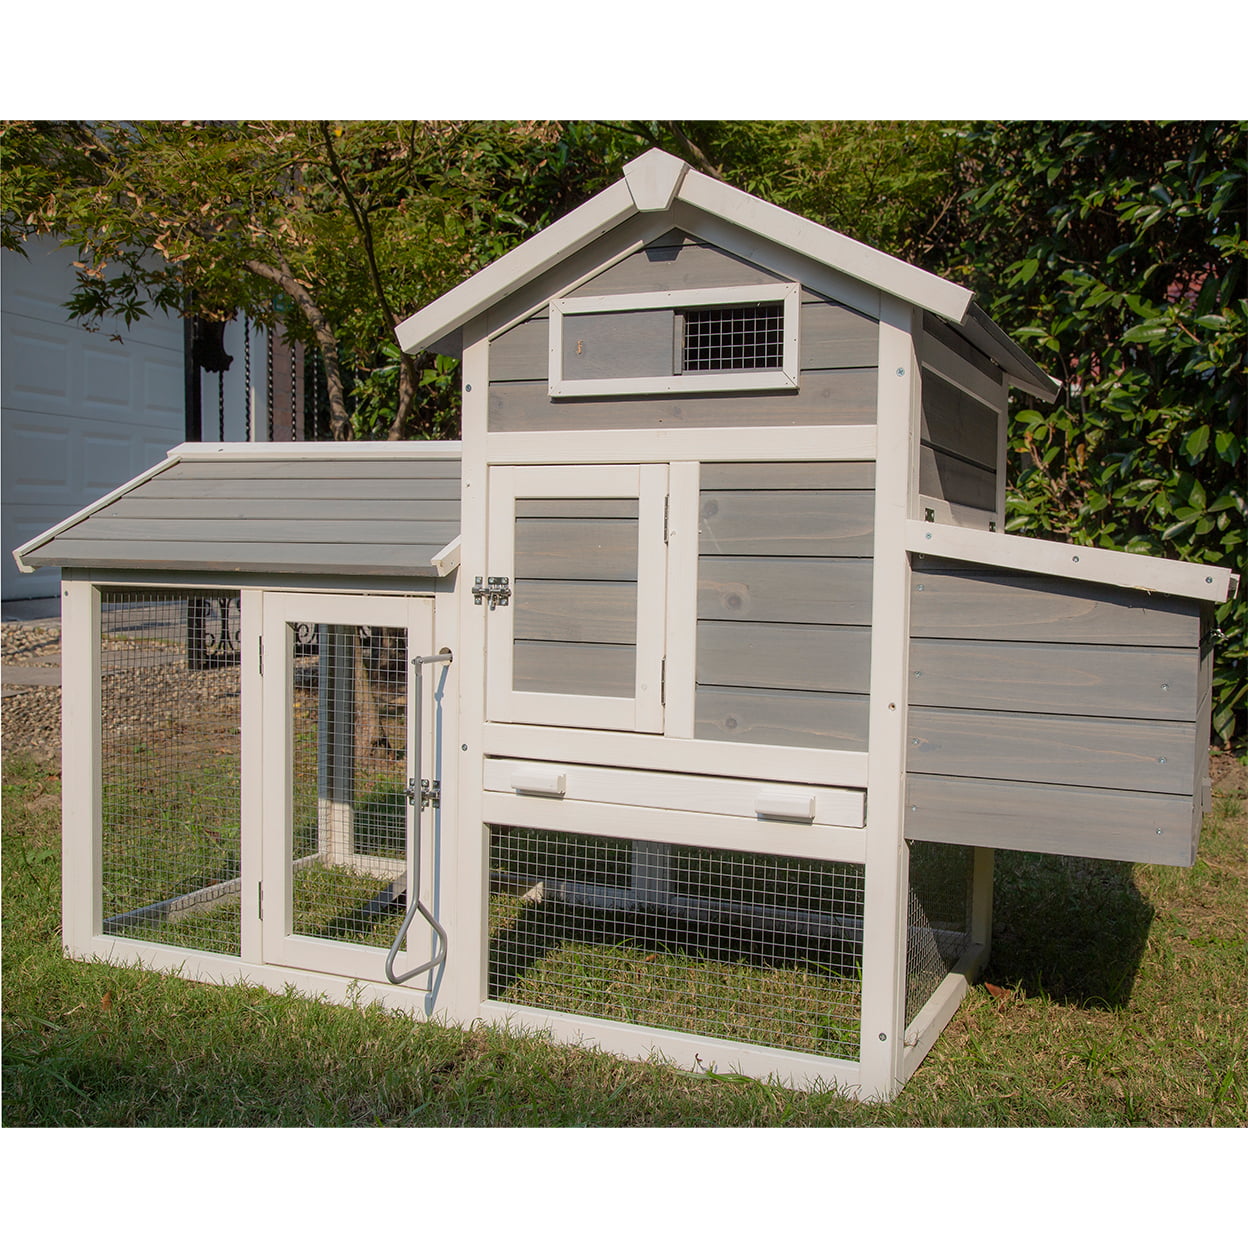 Pets Imperial® Green Ritz Large Chicken Coop Hen Poultry Ark House Run Nest New 